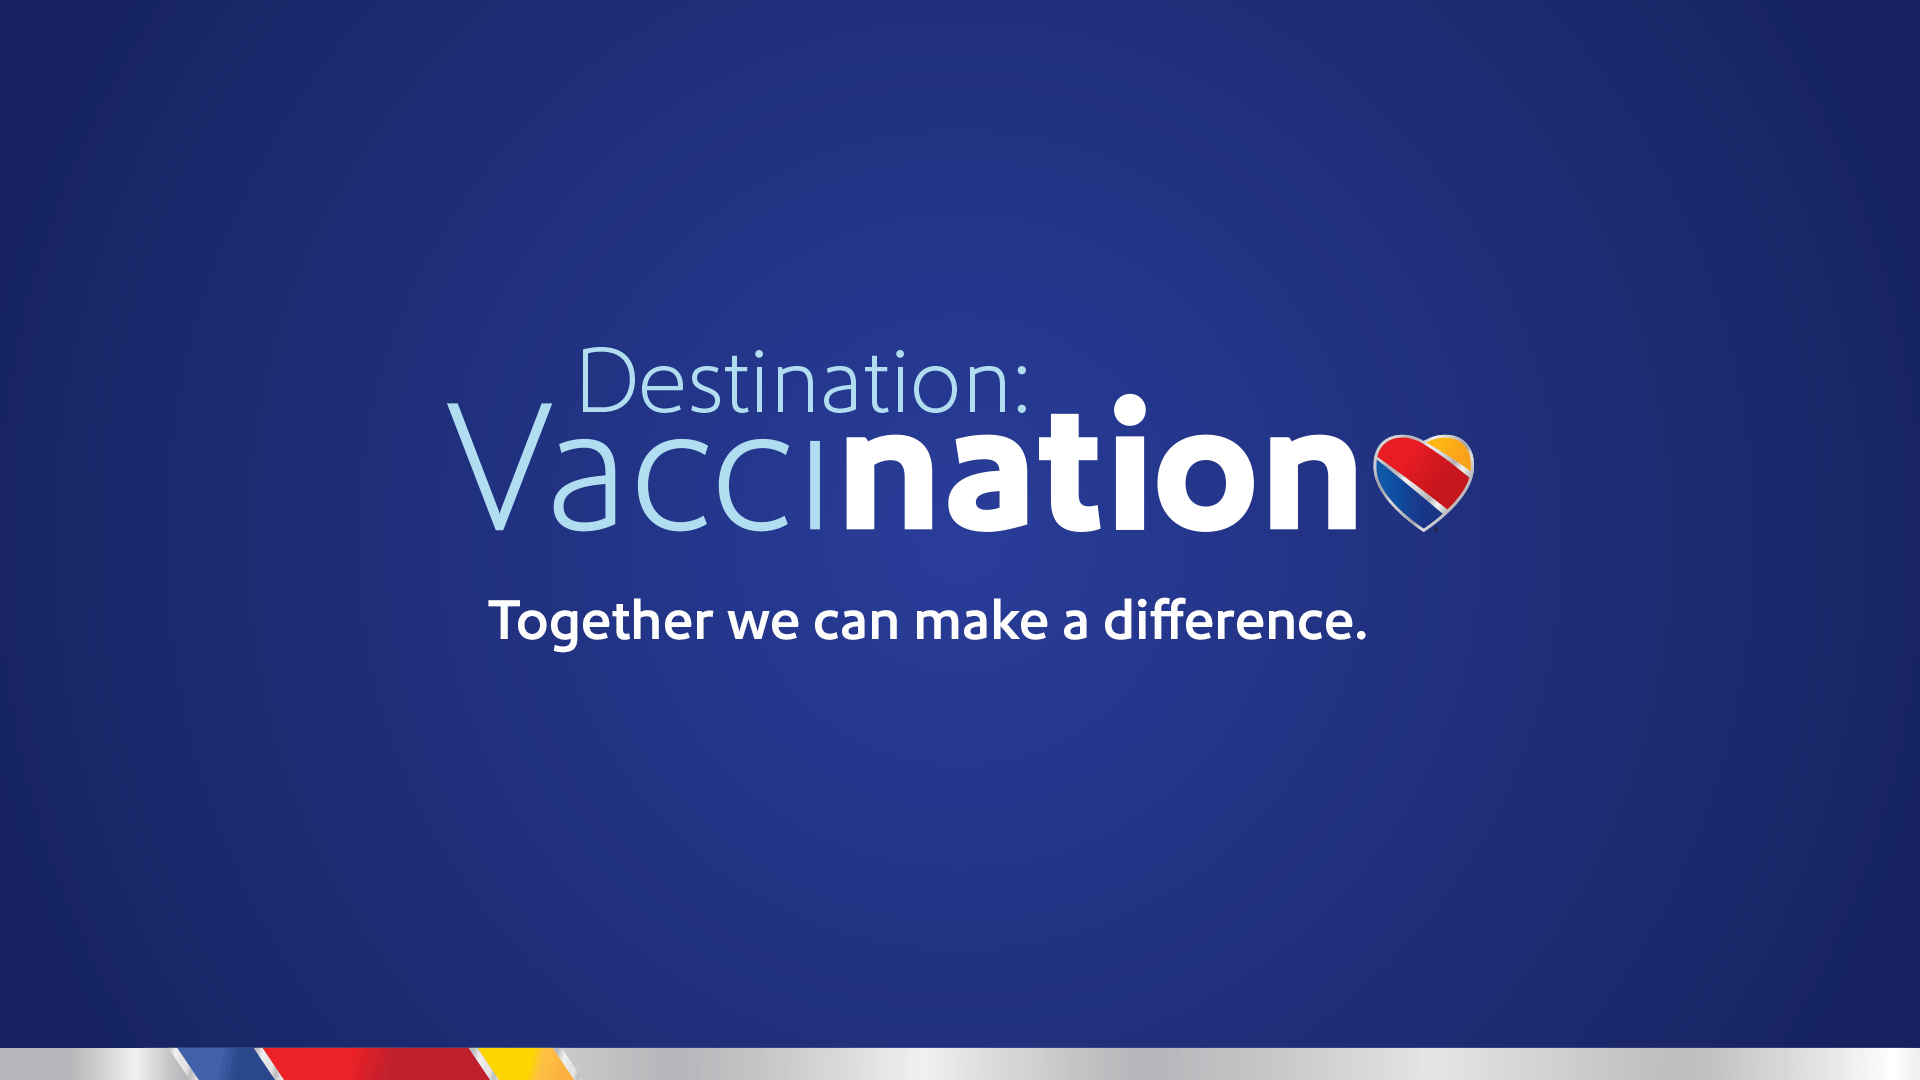 Destination: Vaccination. Together we can make a difference.